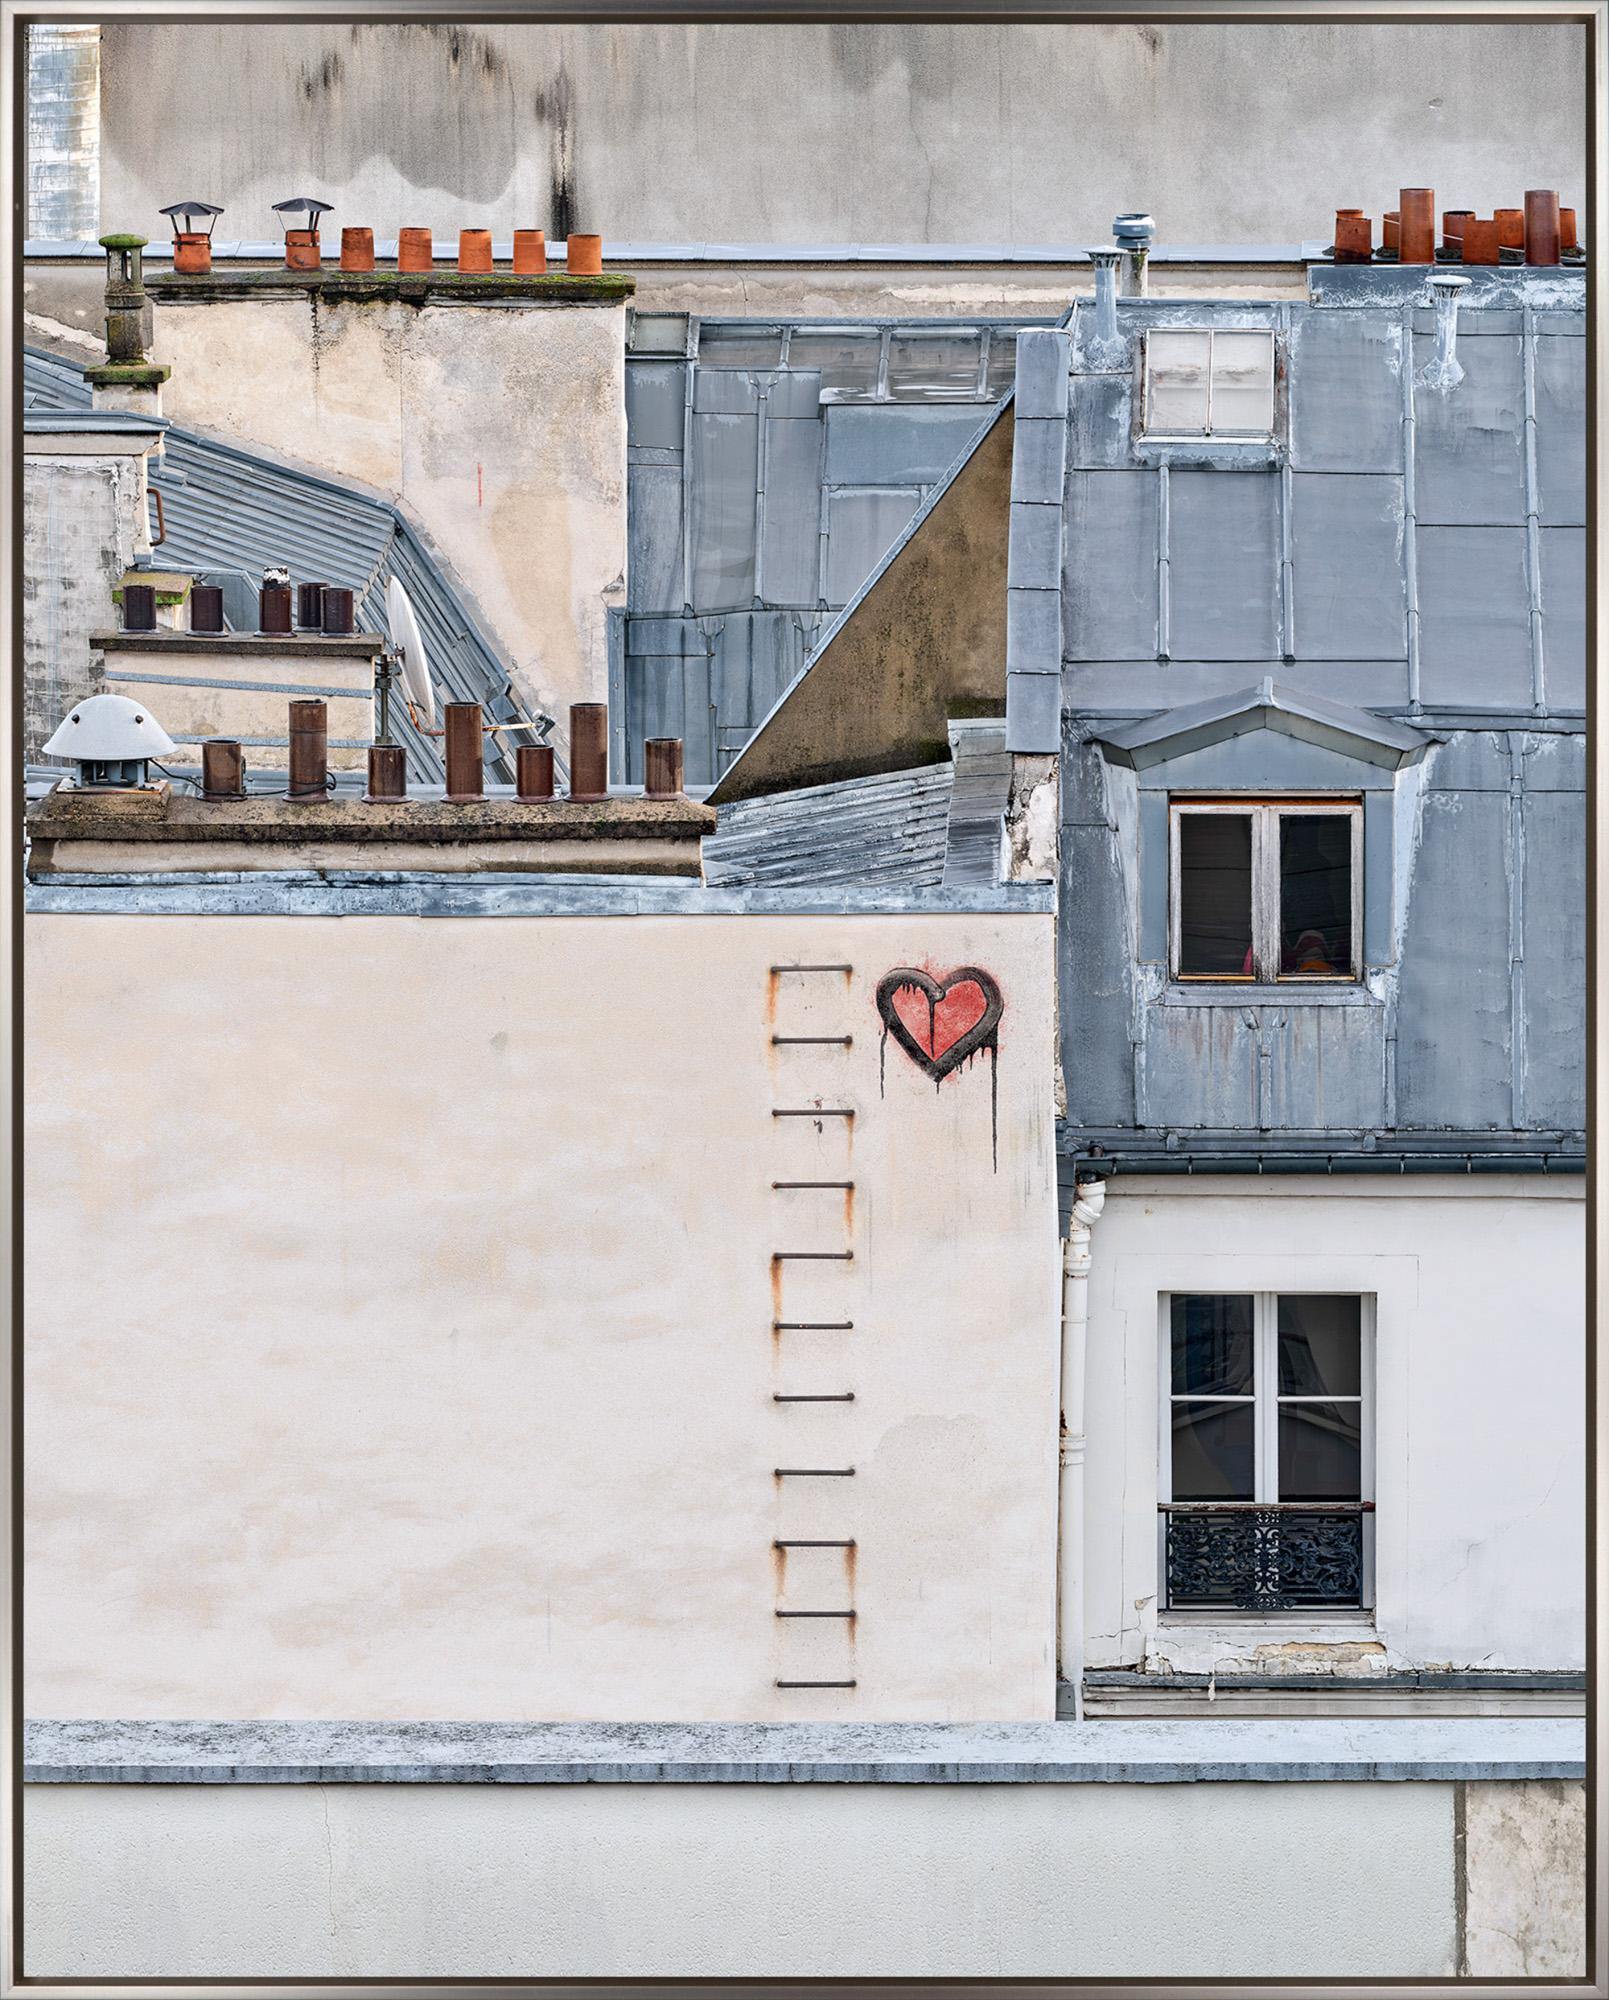 "Amore, Paris, France" is a framed photograph (archival dye infused print) on aluminum by David Burdeny, depicting buildings in Paris with a graffitied heart symbol spray-painted near the center of the composition. The iconic architecture of